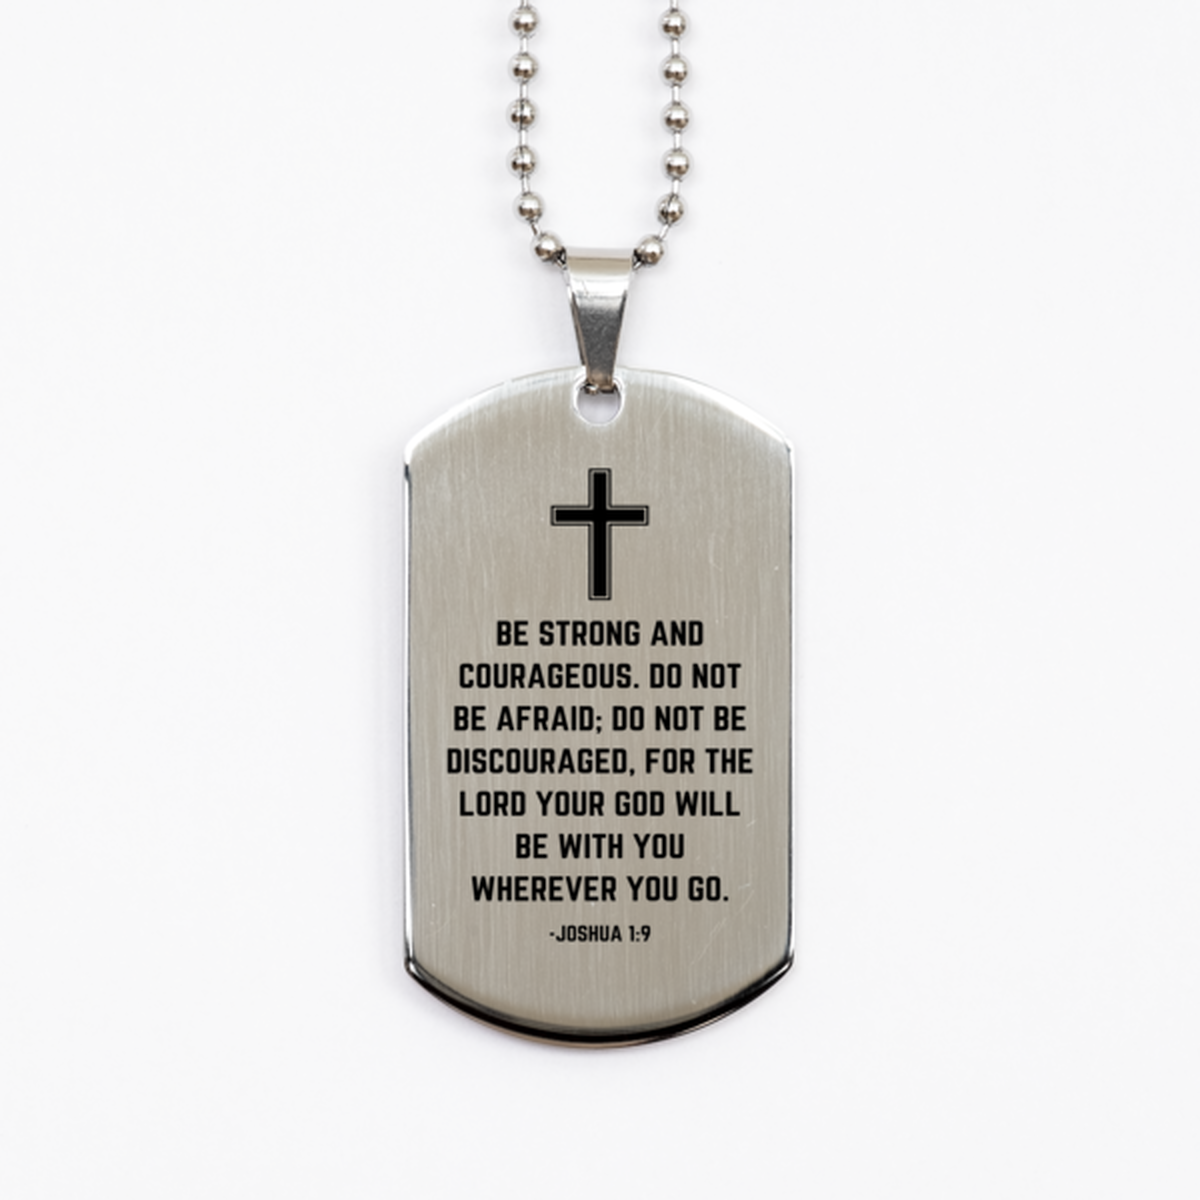 Baptism Gifts For Teenage Boys Girls, Christian Bible Verse Silver Dog Tag, For the lord your God will be with you, Confirmation Gifts, Bible Verse Necklace for Son, Godson, Grandson, Nephew